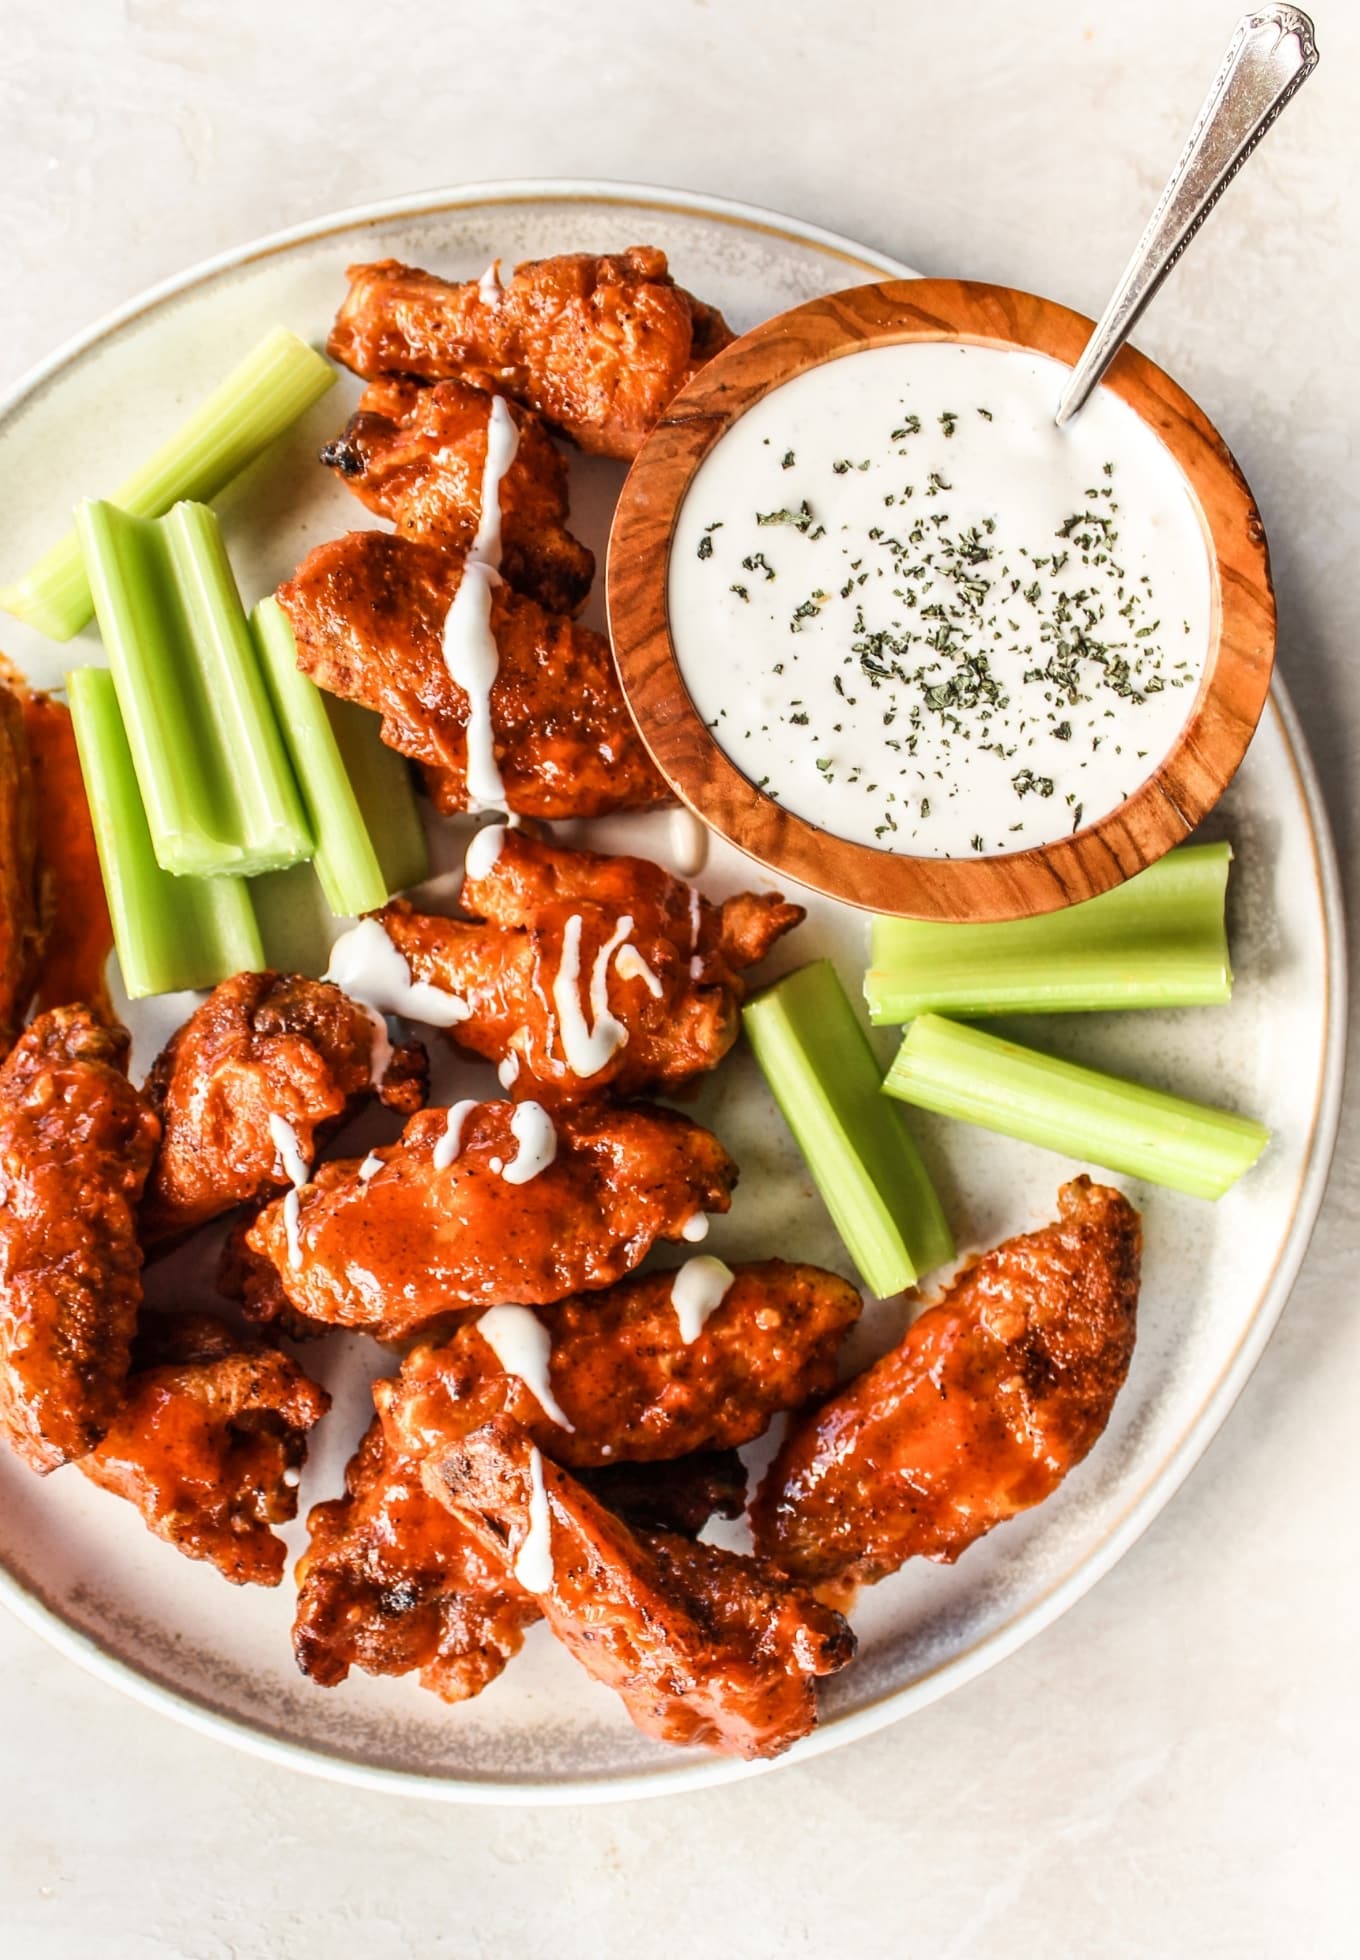 https://thewholecook.com/wp-content/uploads/2017/10/Baked-Buffalo-Chicken-Wings-by-The-Whole-Cook-vertical.jpg